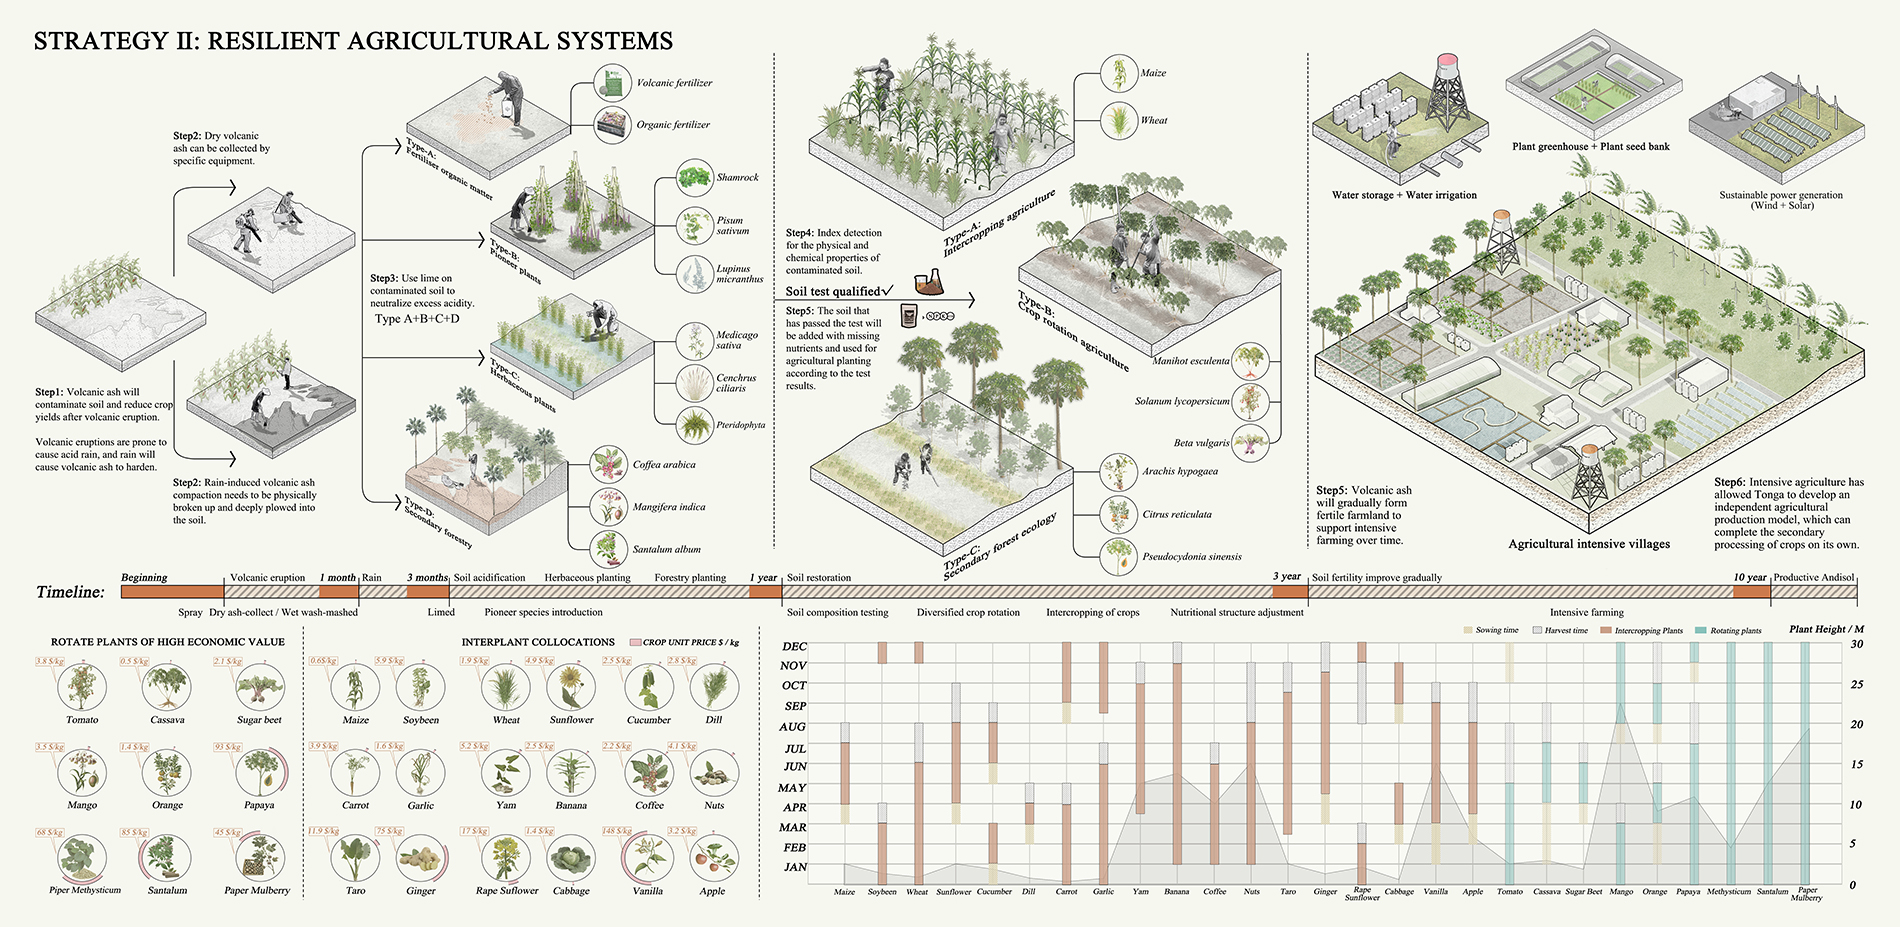 Strategy 2: Resilient Agricultural Systems